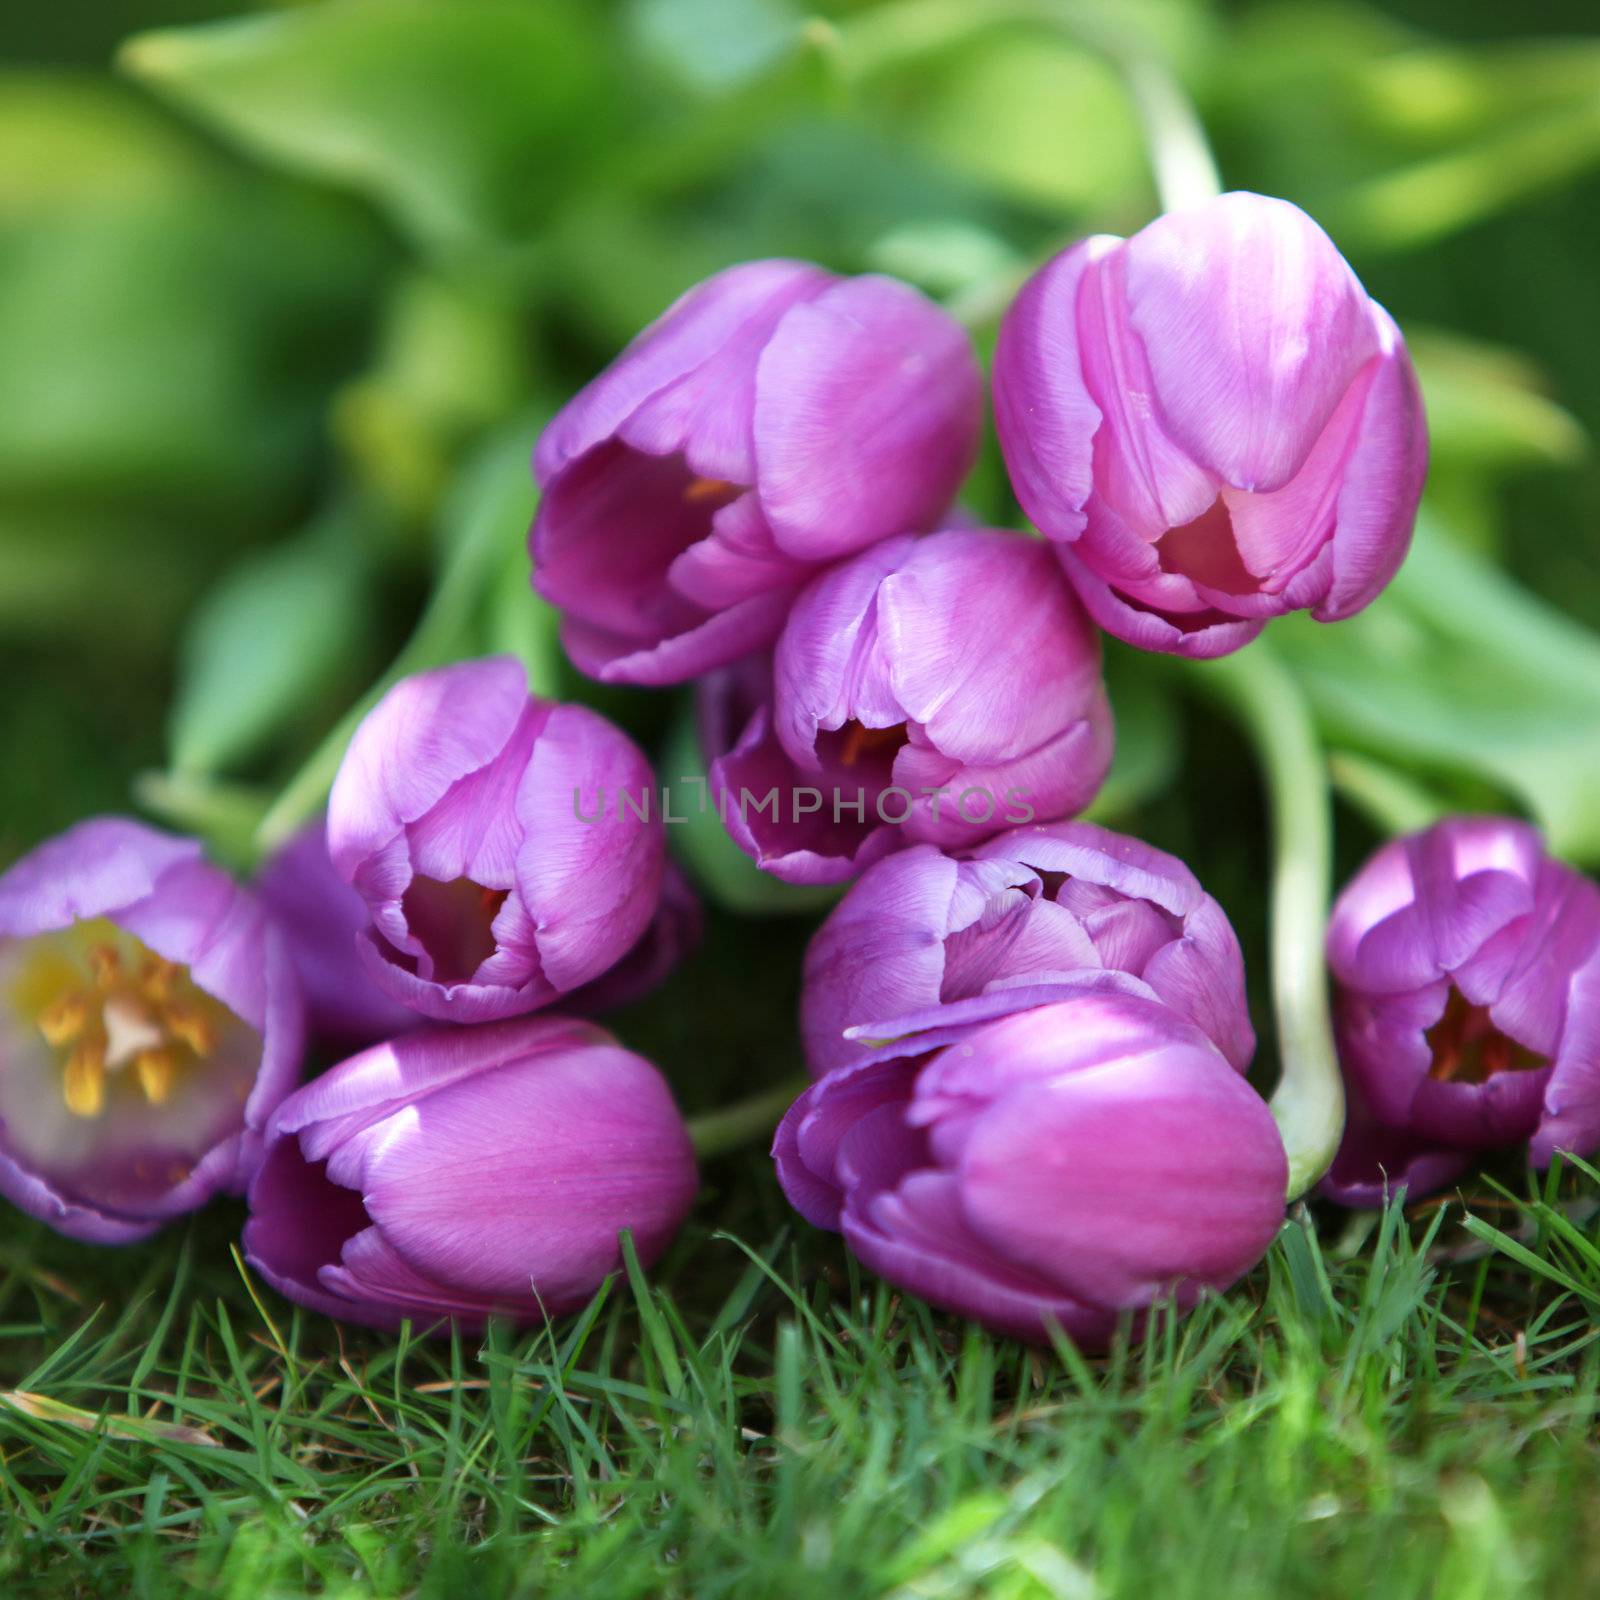 Bunch of beautiful fresh magenta coloured purple tulips lying on green grass in spring